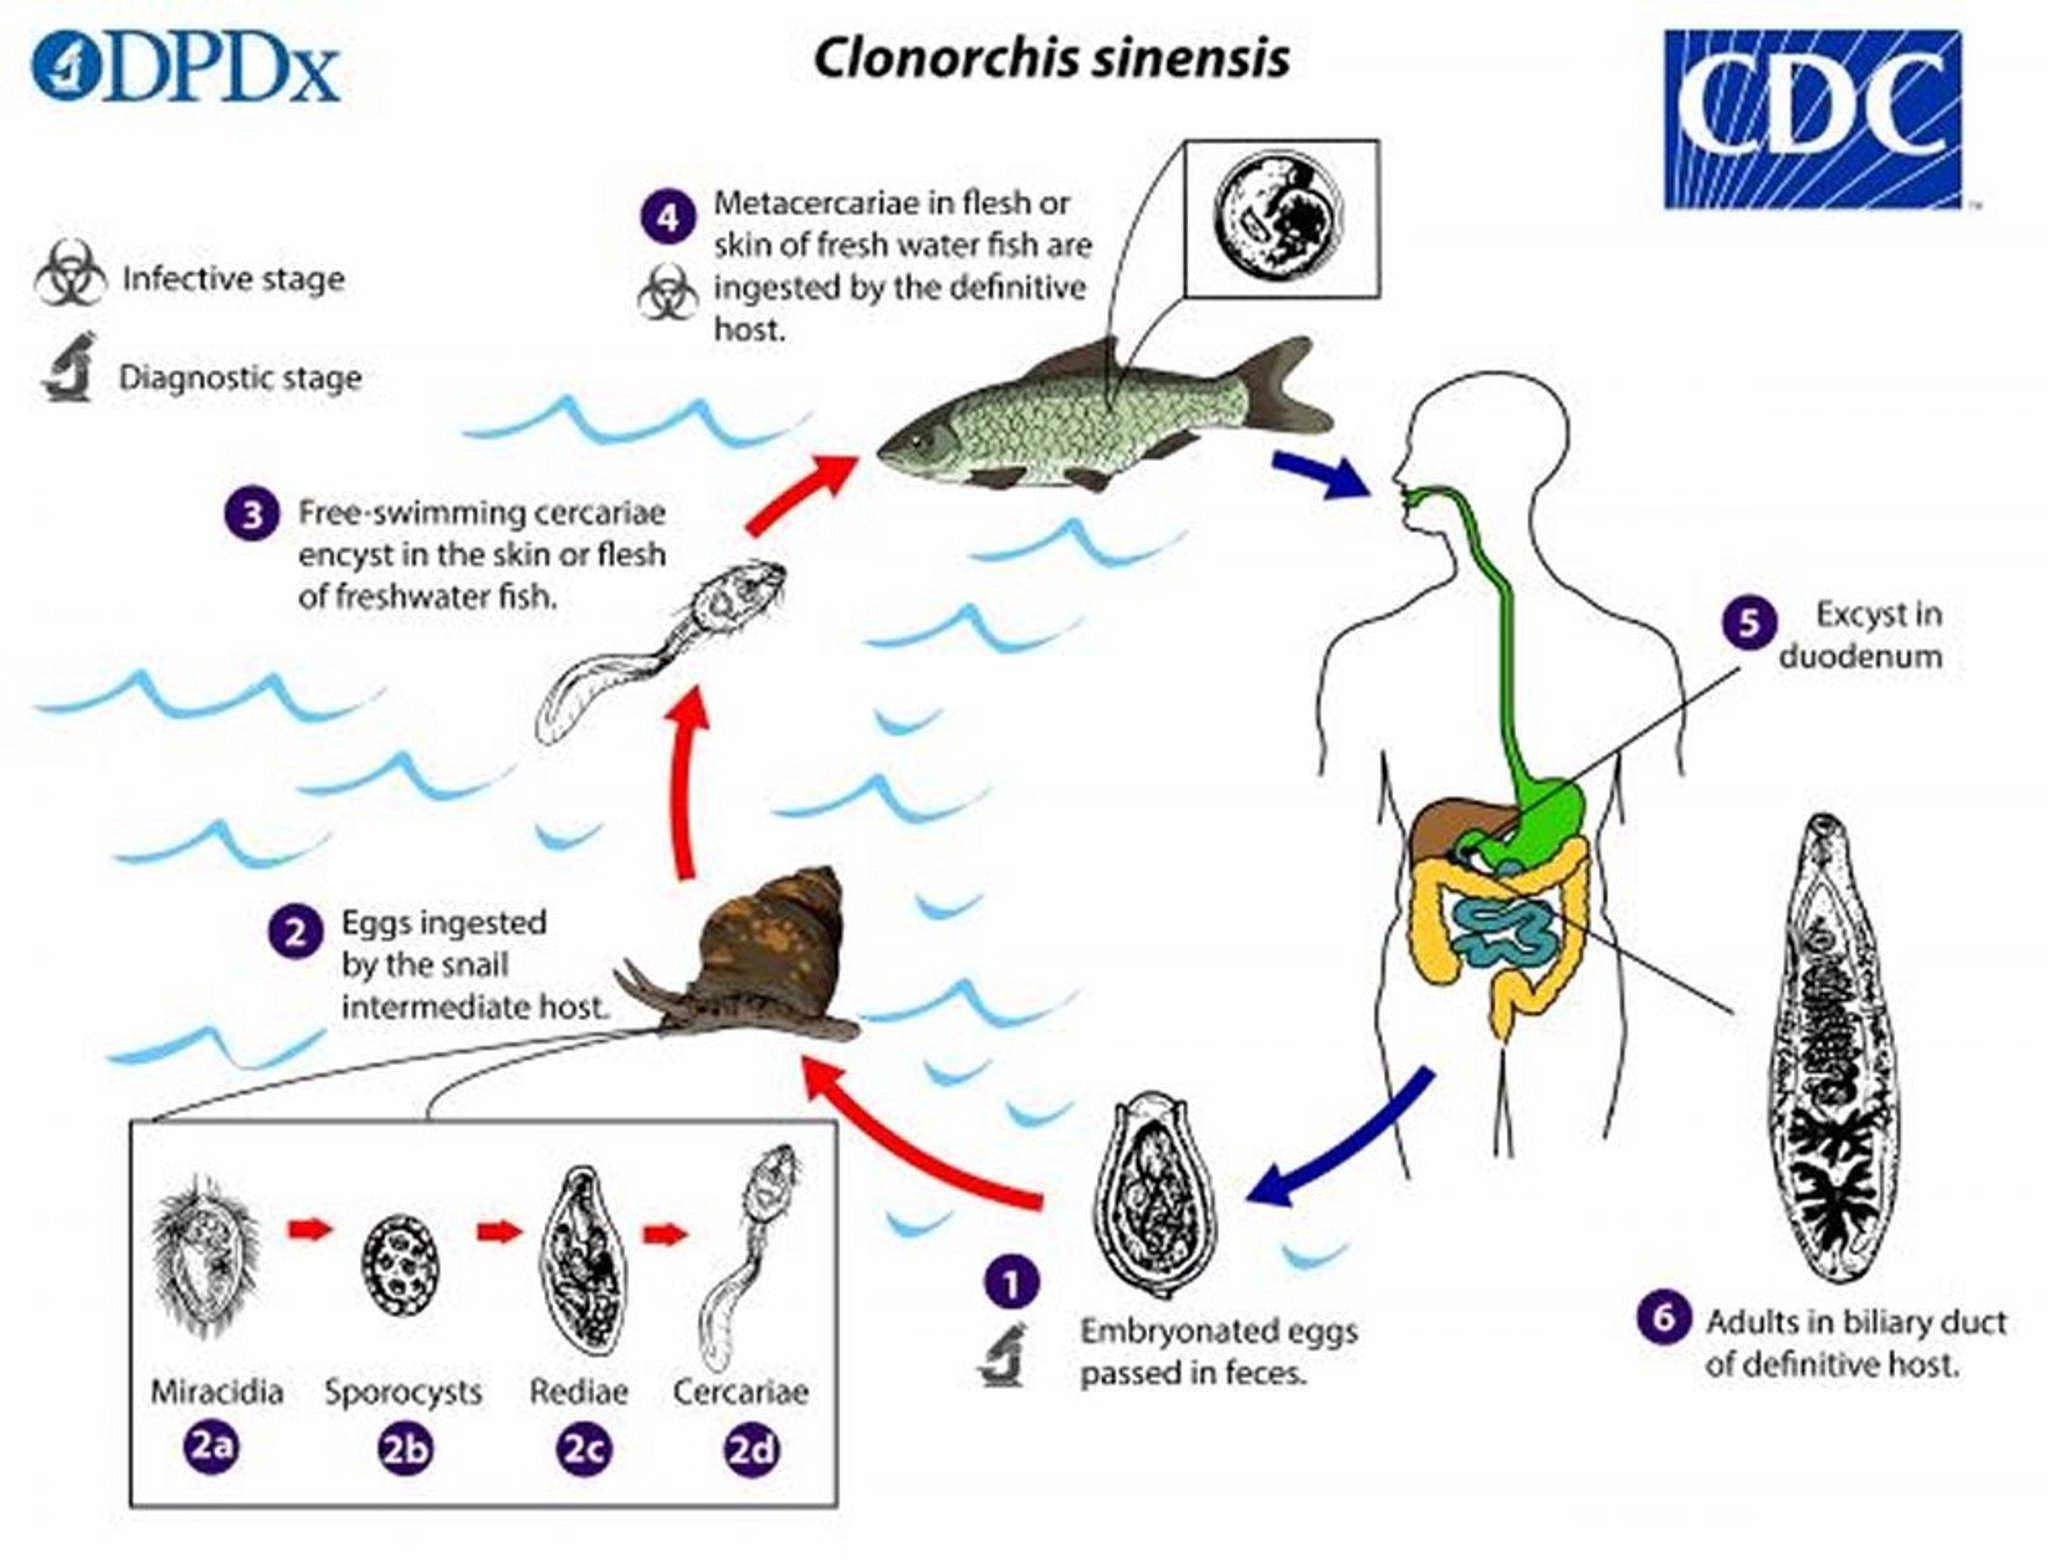 Life Cycle of <i >Clonorchis sinensis</i>